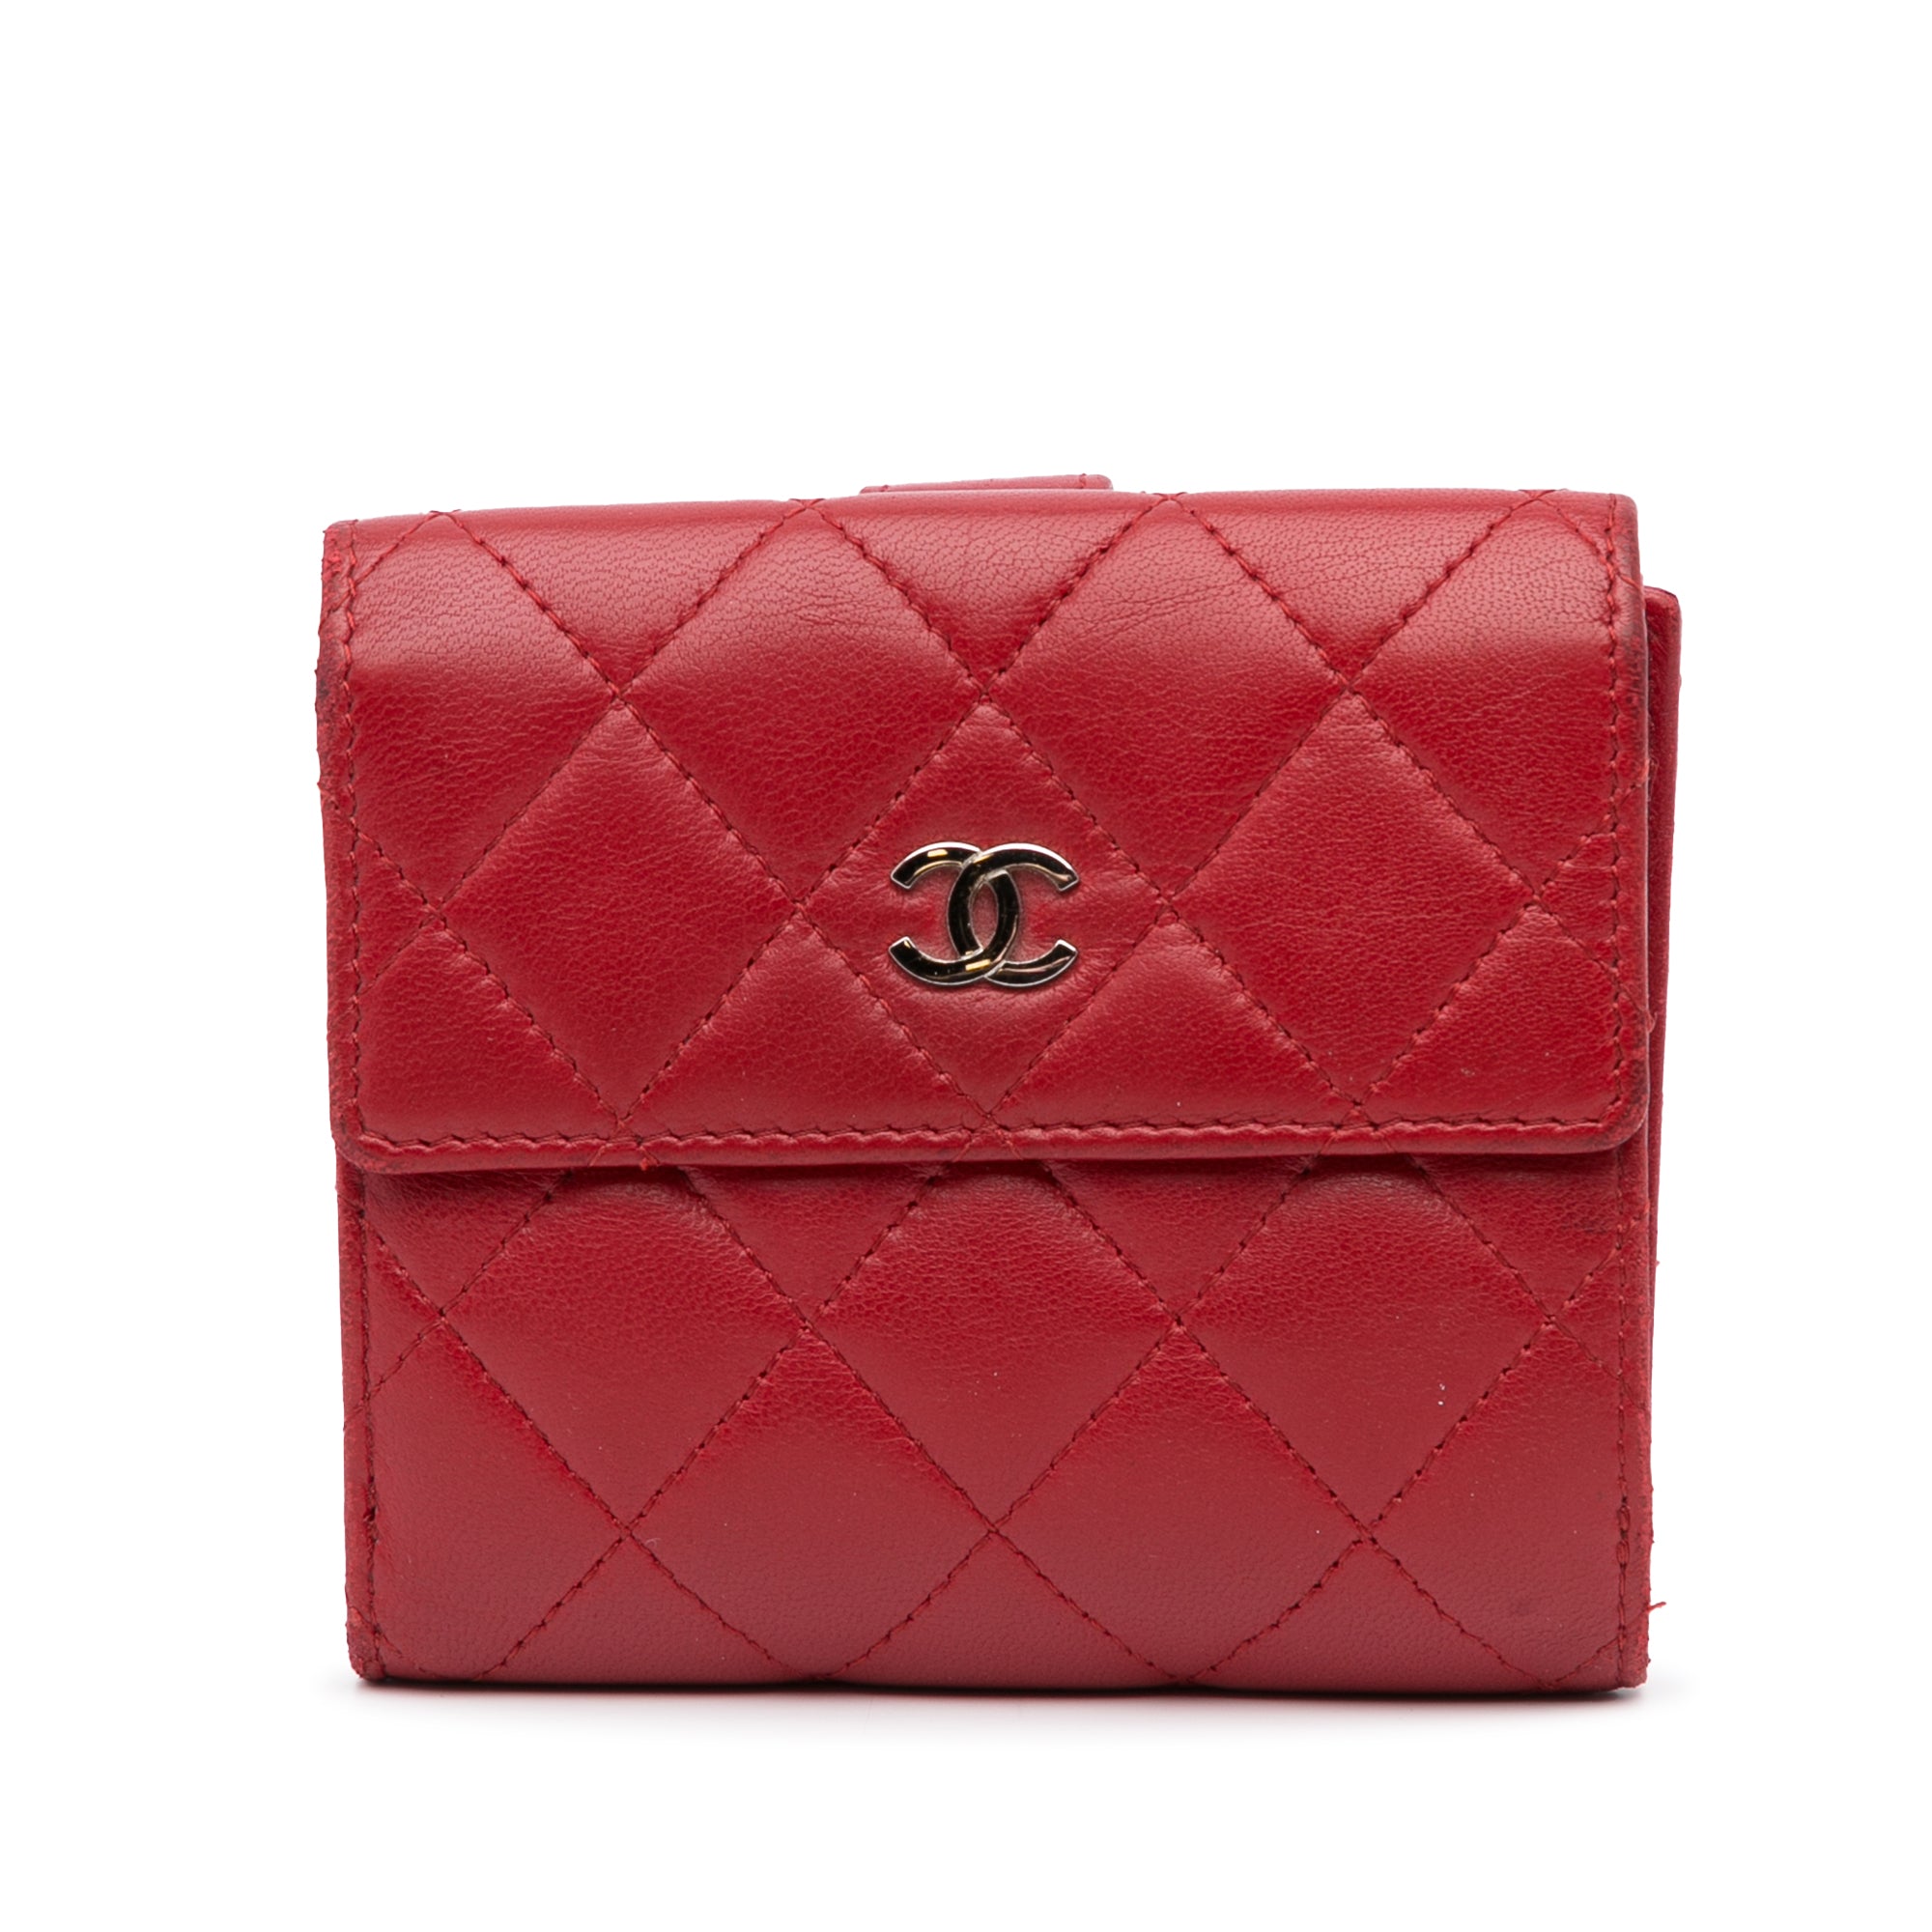 Cra-wallonieShops Revival  Red Chanel CC Matelasse Small Wallet